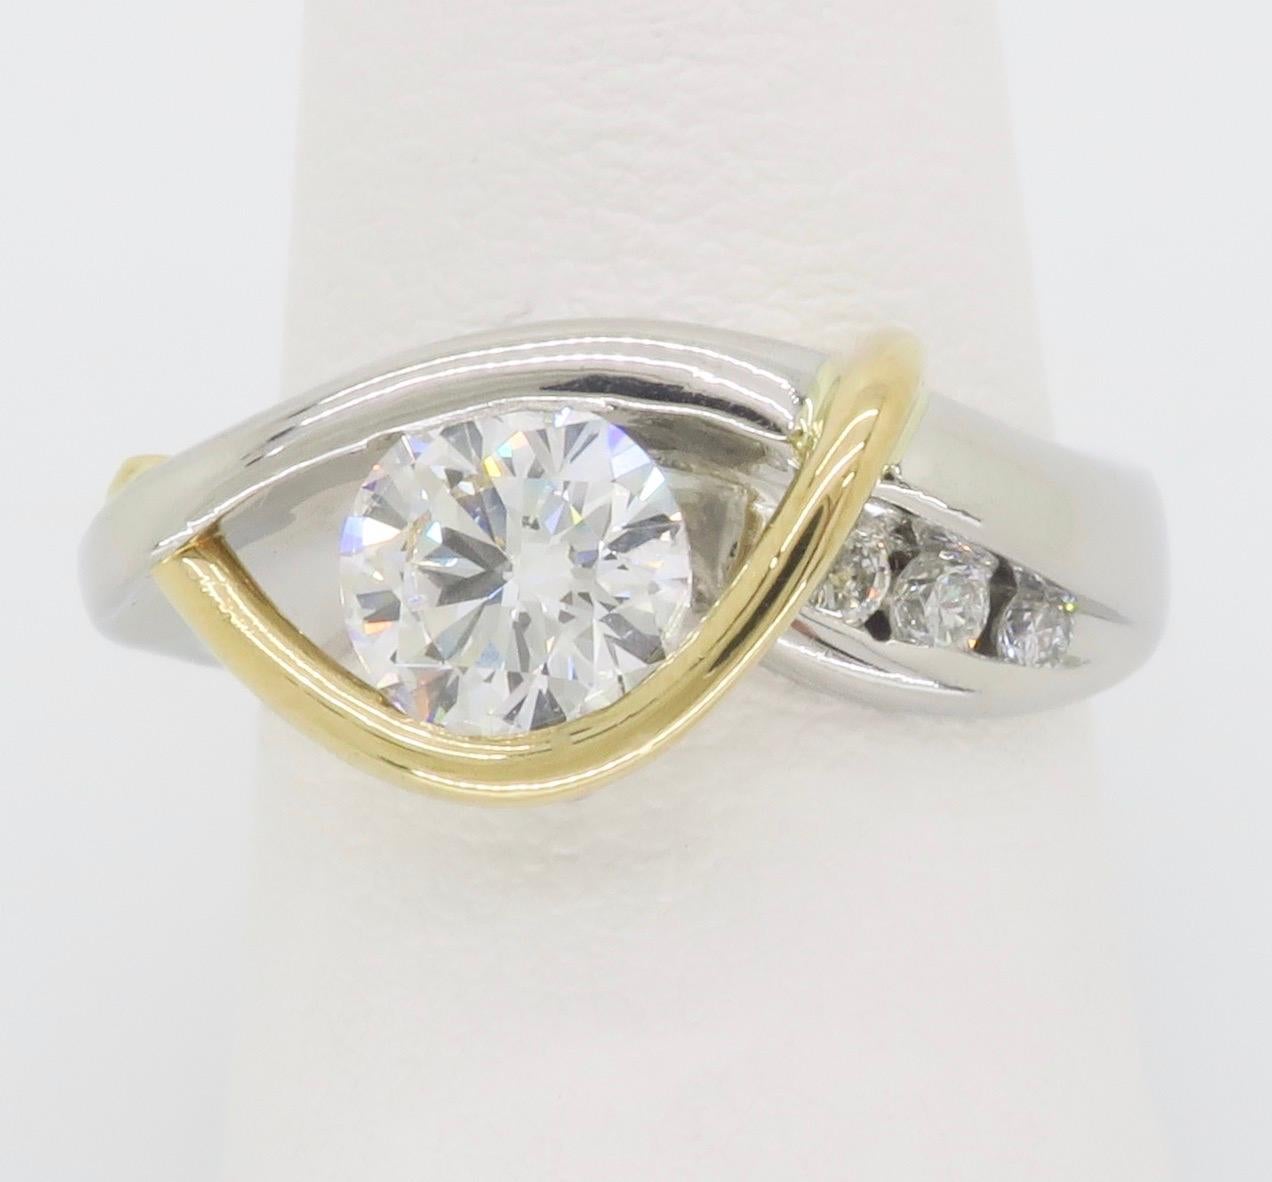 Custom made Platinum & 18k yellow gold contemporary ring, featuring a GIA certified diamond that can be worn two ways.  

Center Diamond Carat Weight: 1.00CT
Center Diamond Cut: Round Brilliant
Center Diamond Color: F
Center Diamond Clarity: